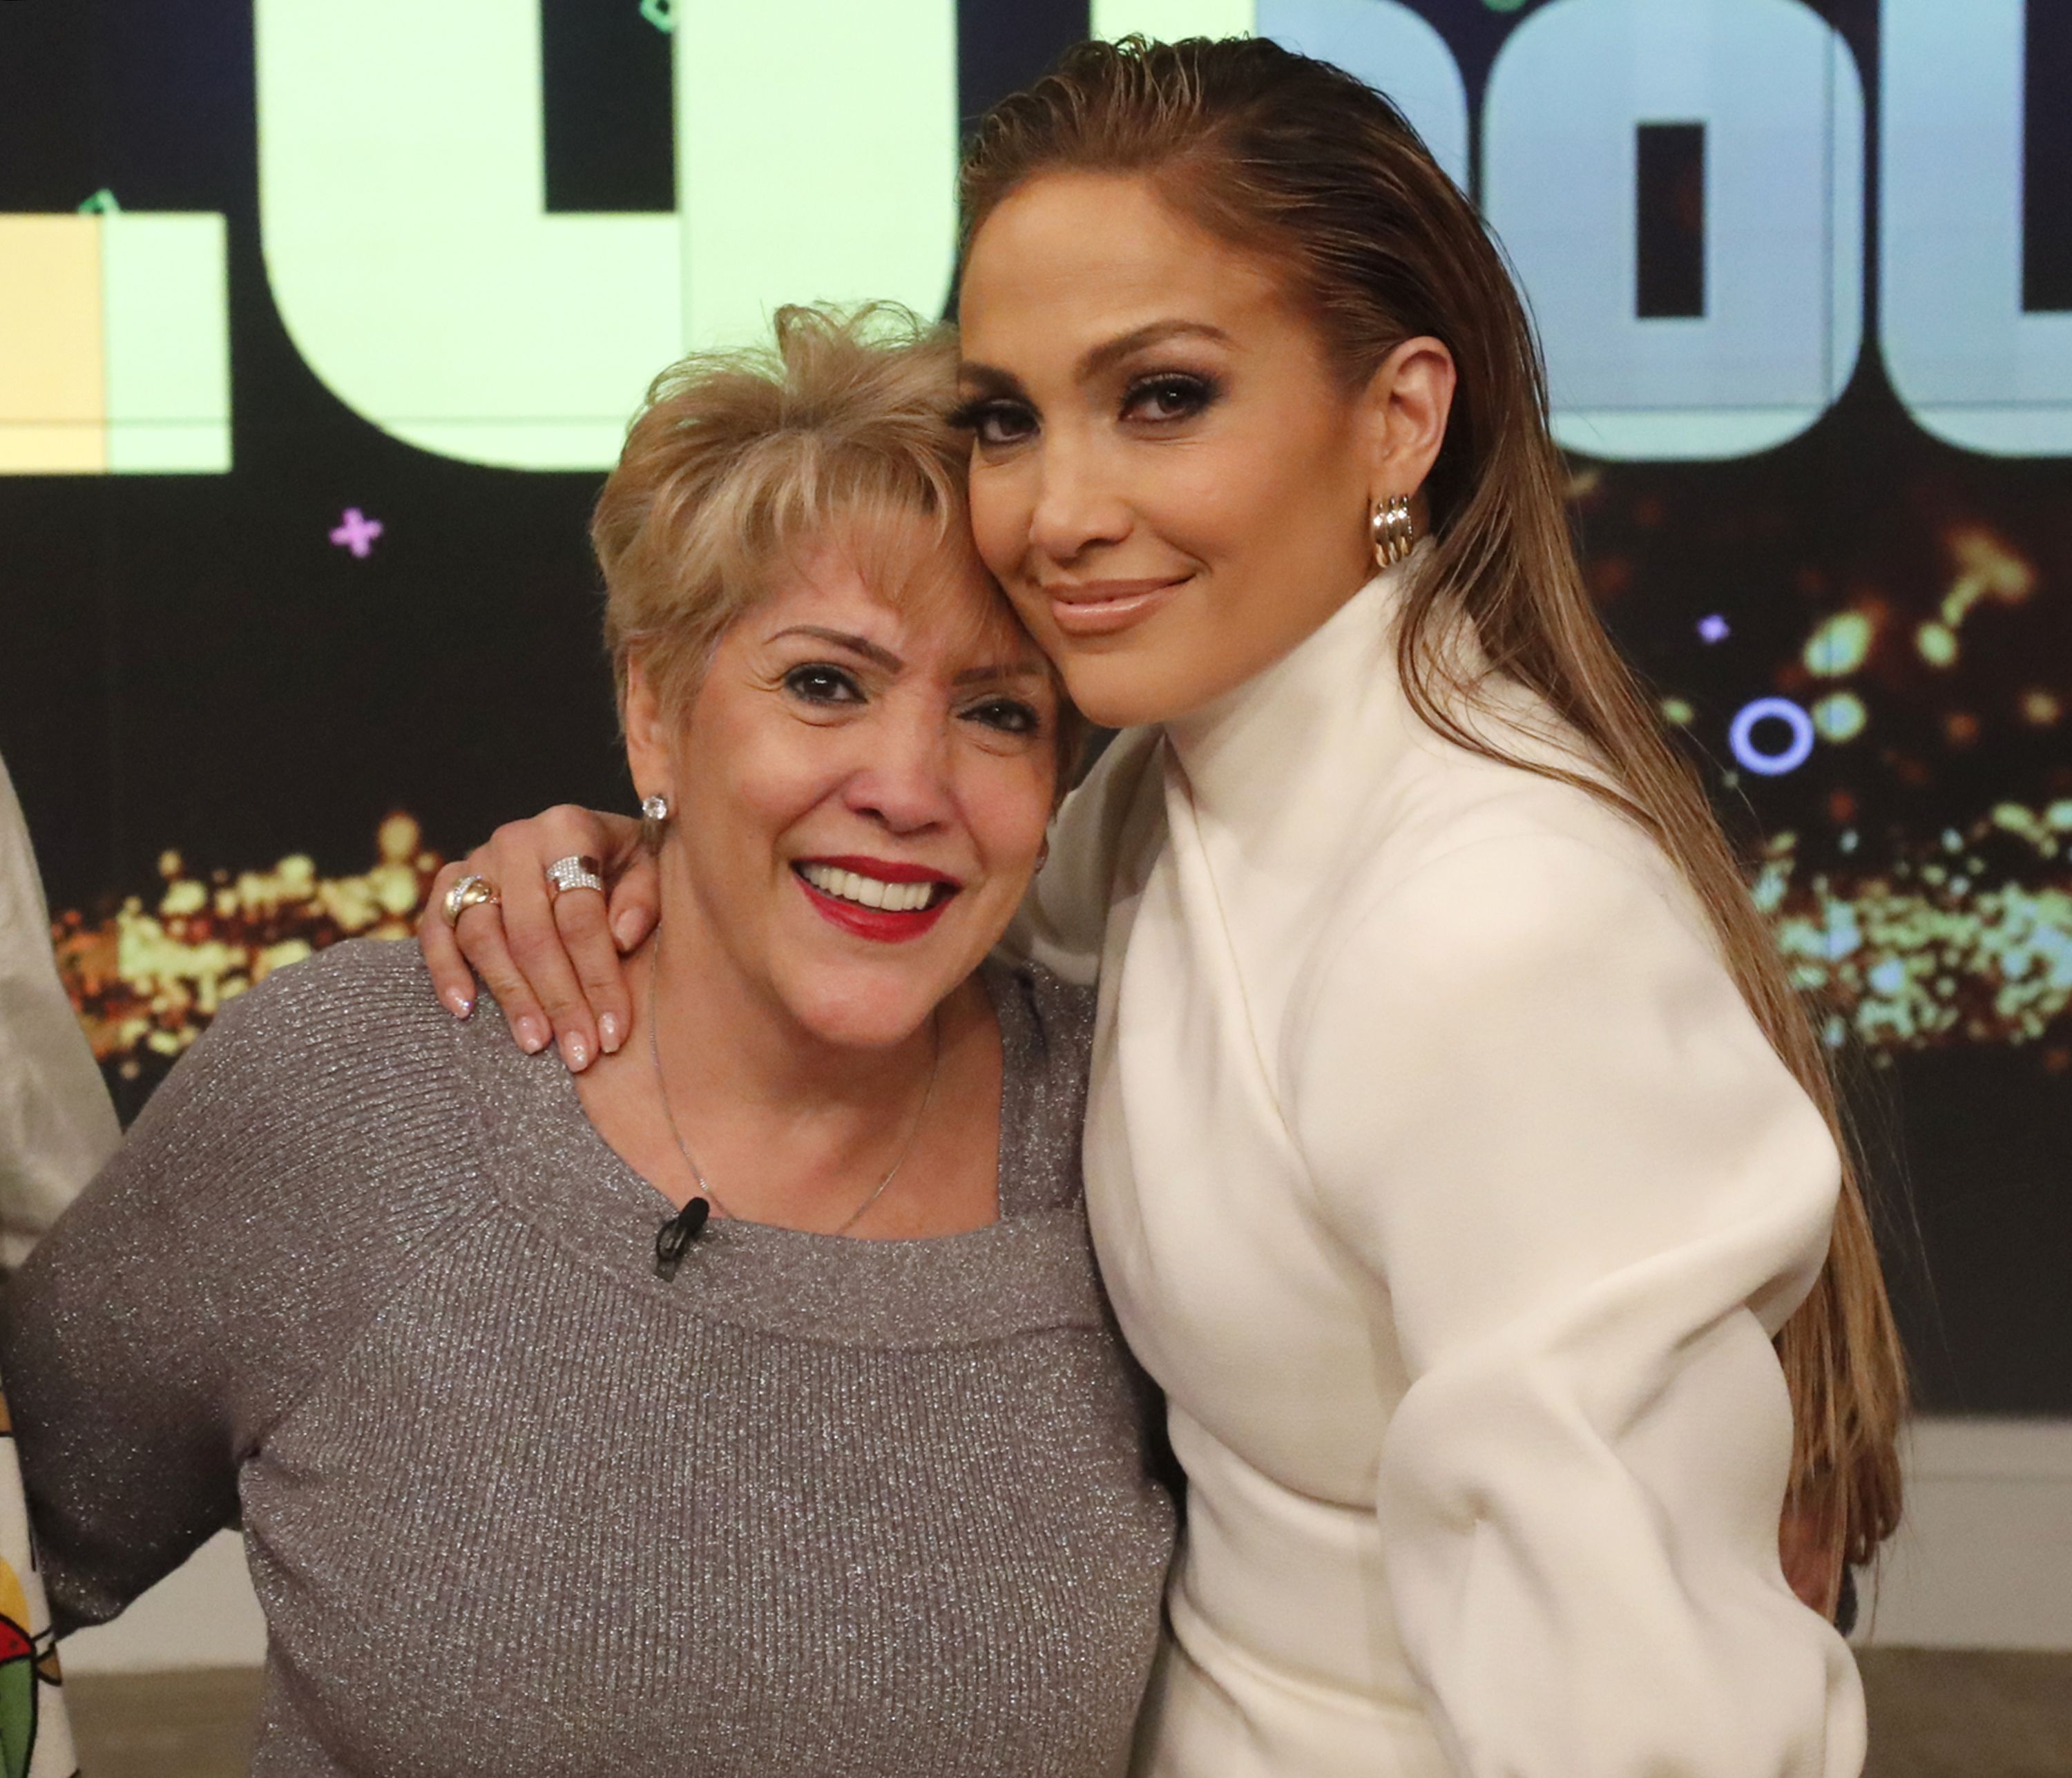 J.Lo Got Her Dance Moves From Her 74-Year-Old Mom, Guadalupe